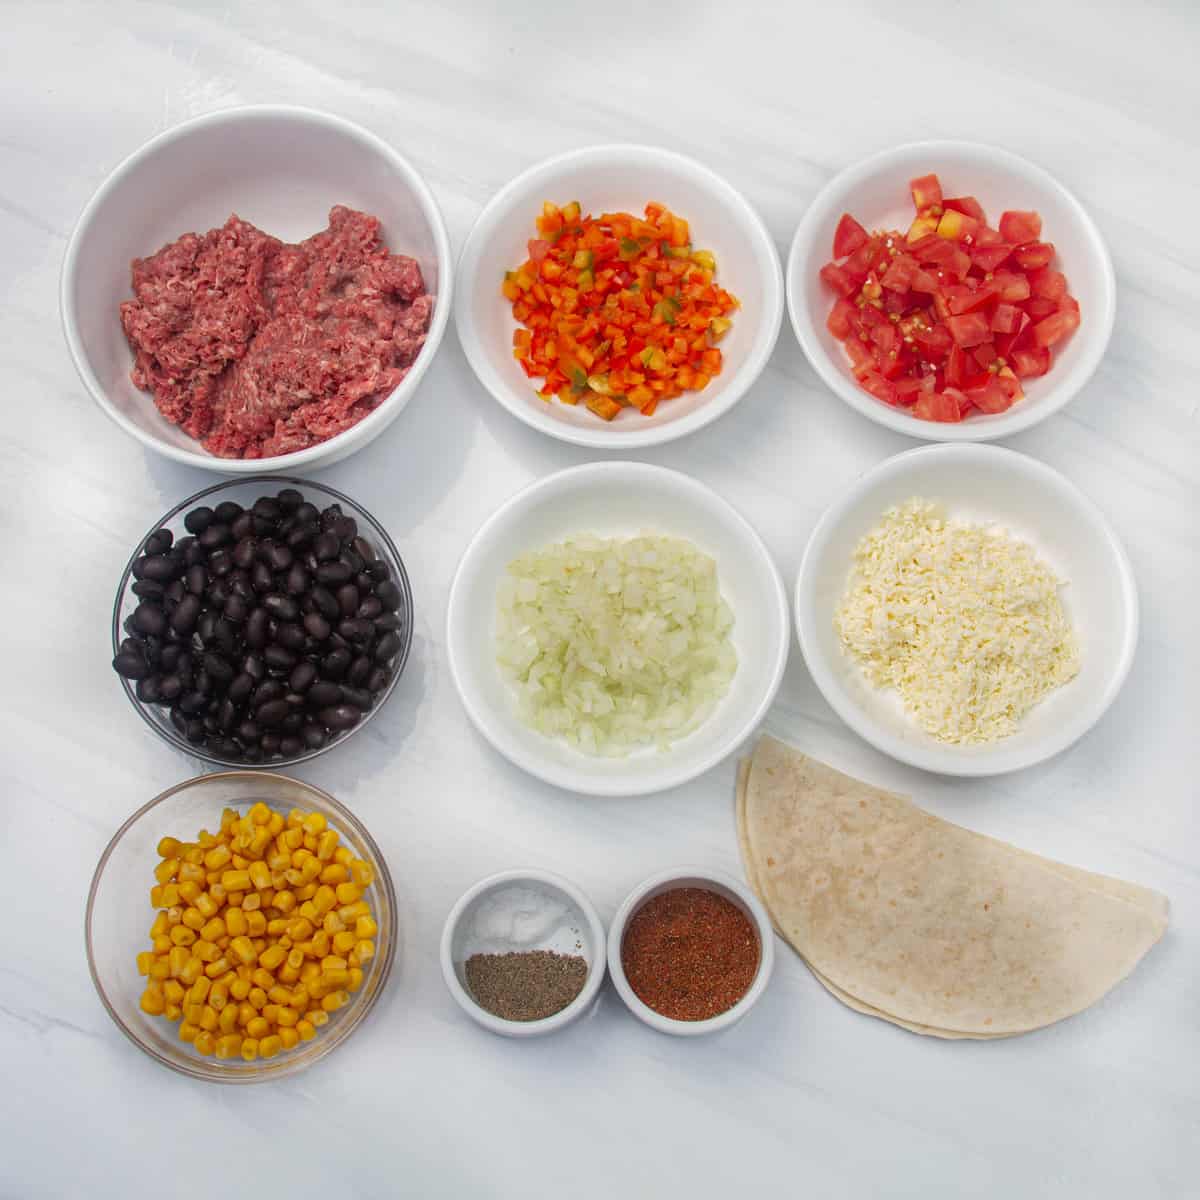 Ingredients of ground beef, taco seasoning, black beans, sweet corn, diced tomatoes, diced onions, chopped bell pepper, grated cheese, tortillas, and Greek yogurt in separate dishes. 